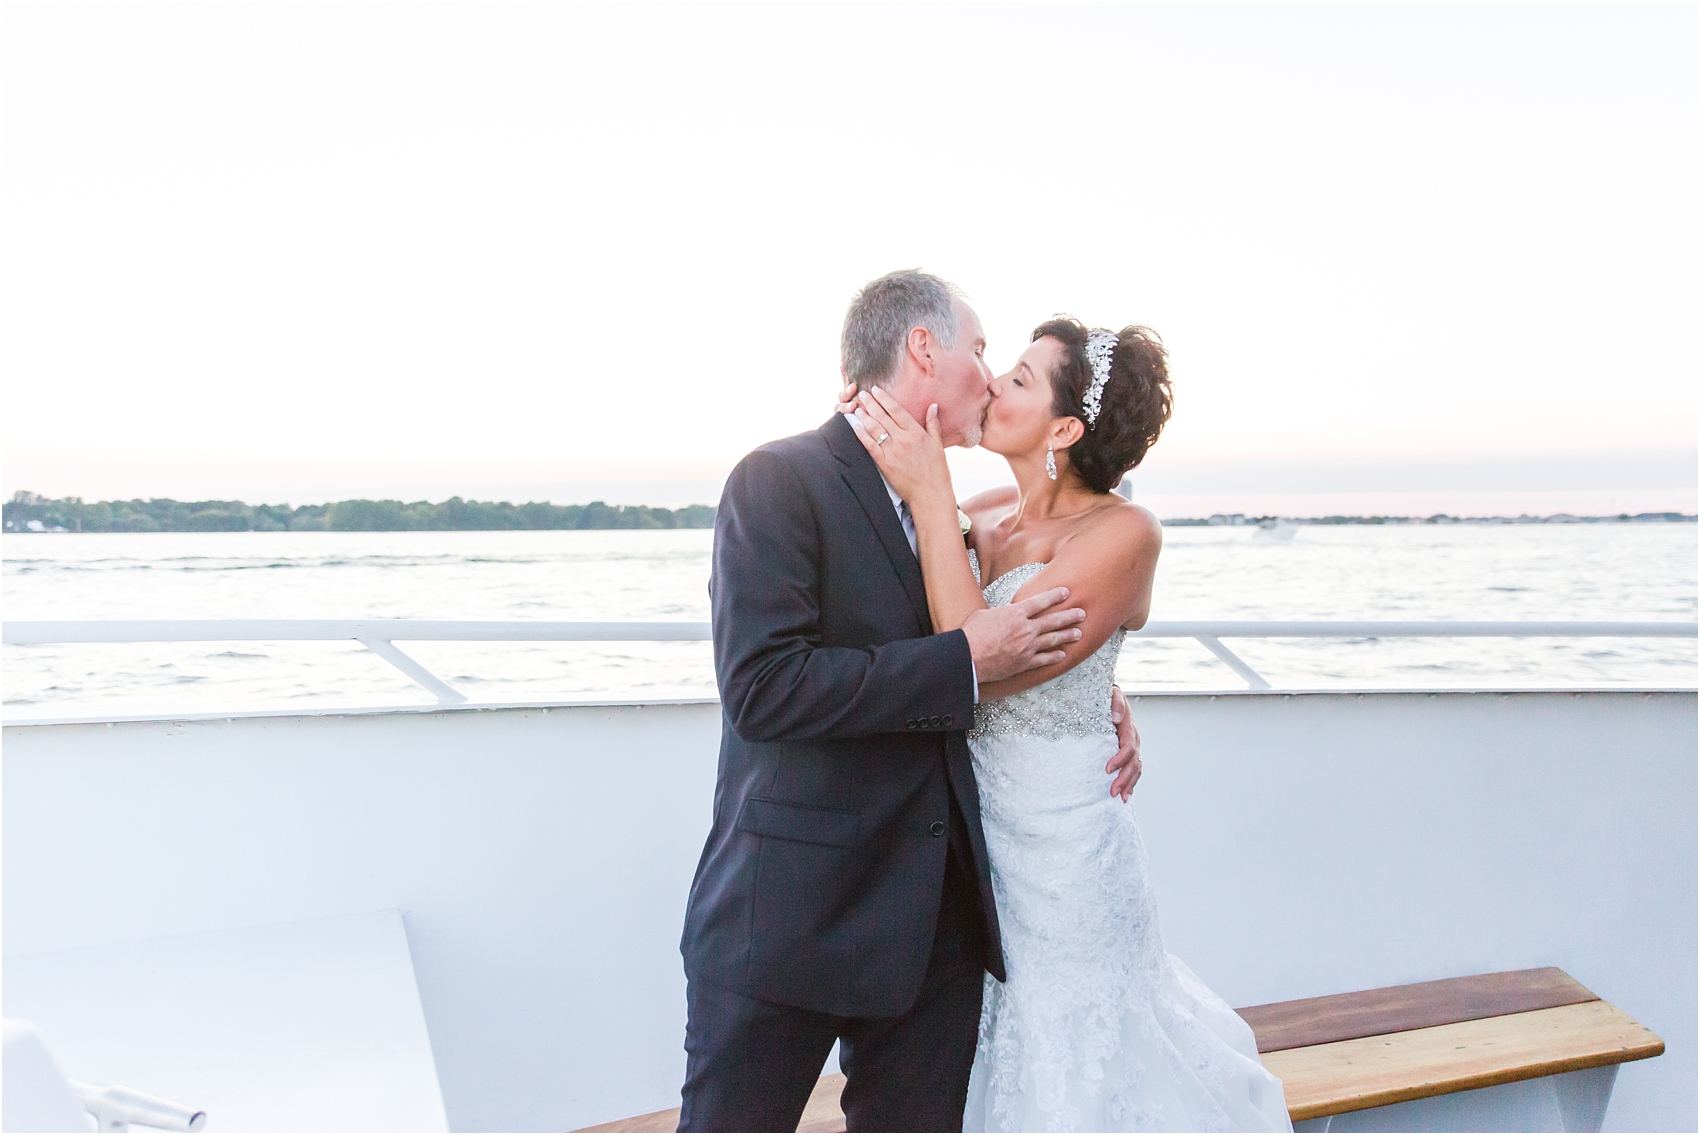 classic-natuical-inspired-wedding-photos-on-infinity-ovation-yacht-in-st-clair-shores-mi-by-courtney-carolyn-photography_0077.jpg